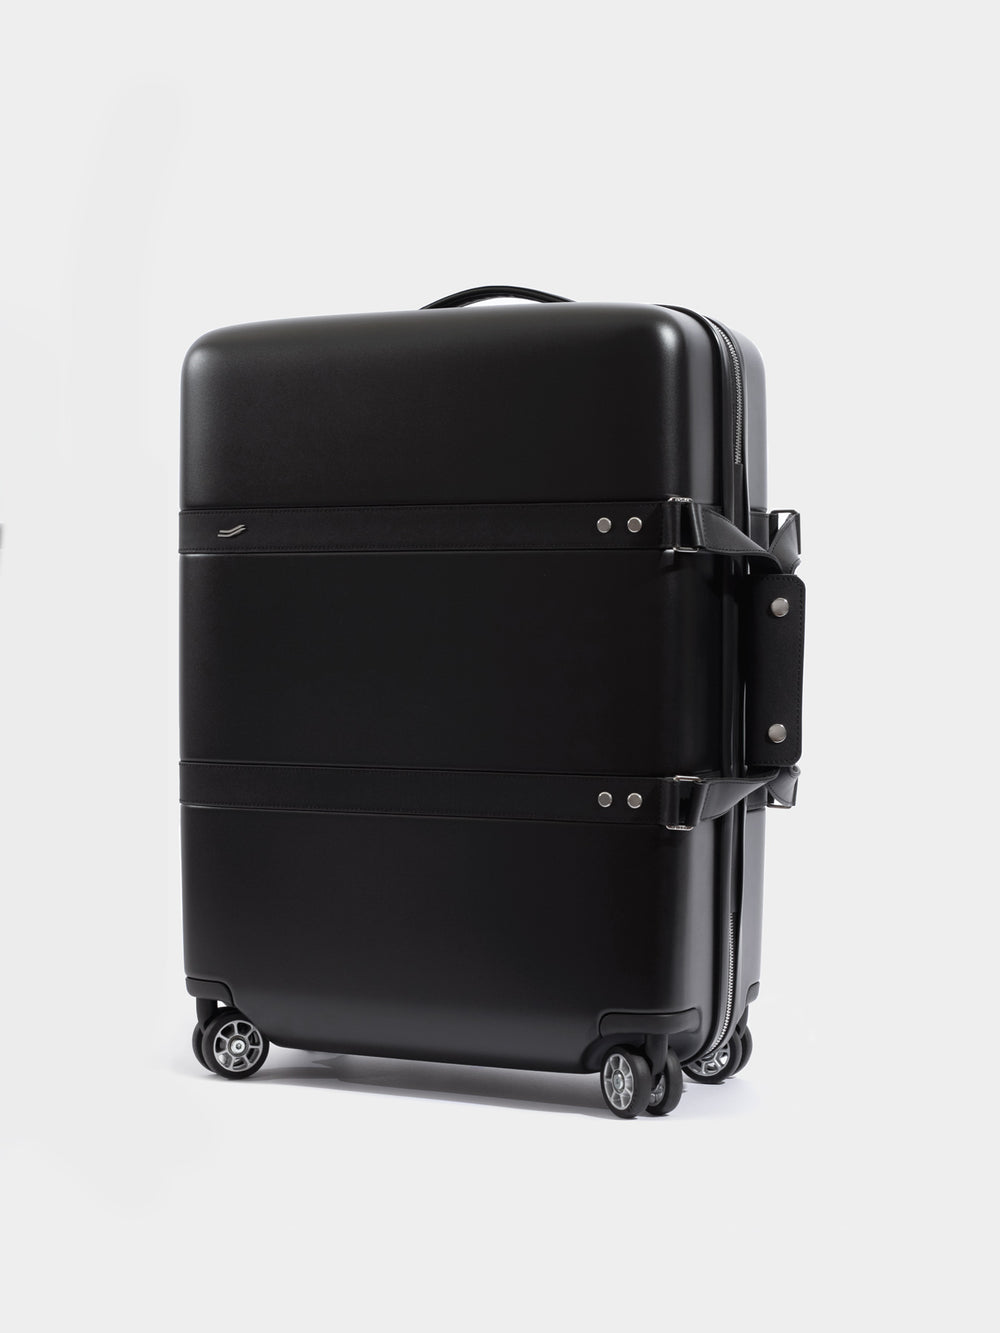 P55 Carry-On Luggage